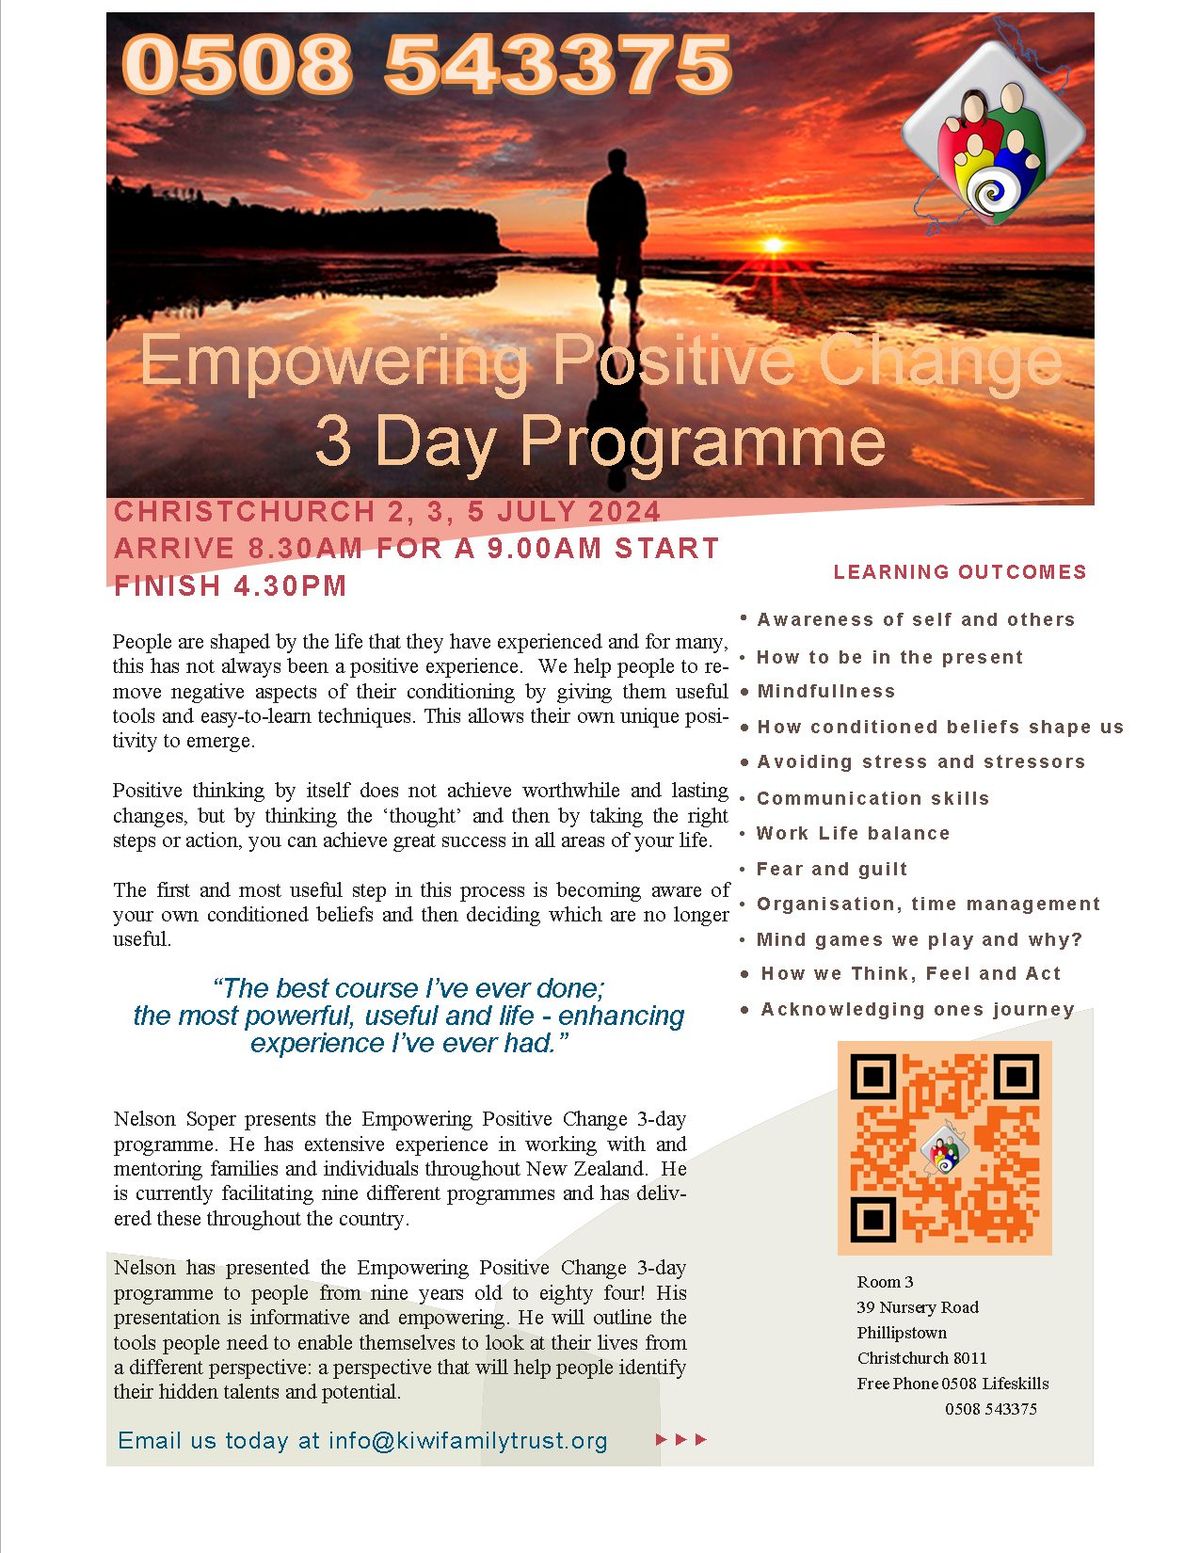 Christchurch 3 day Empowering Positive Change programme